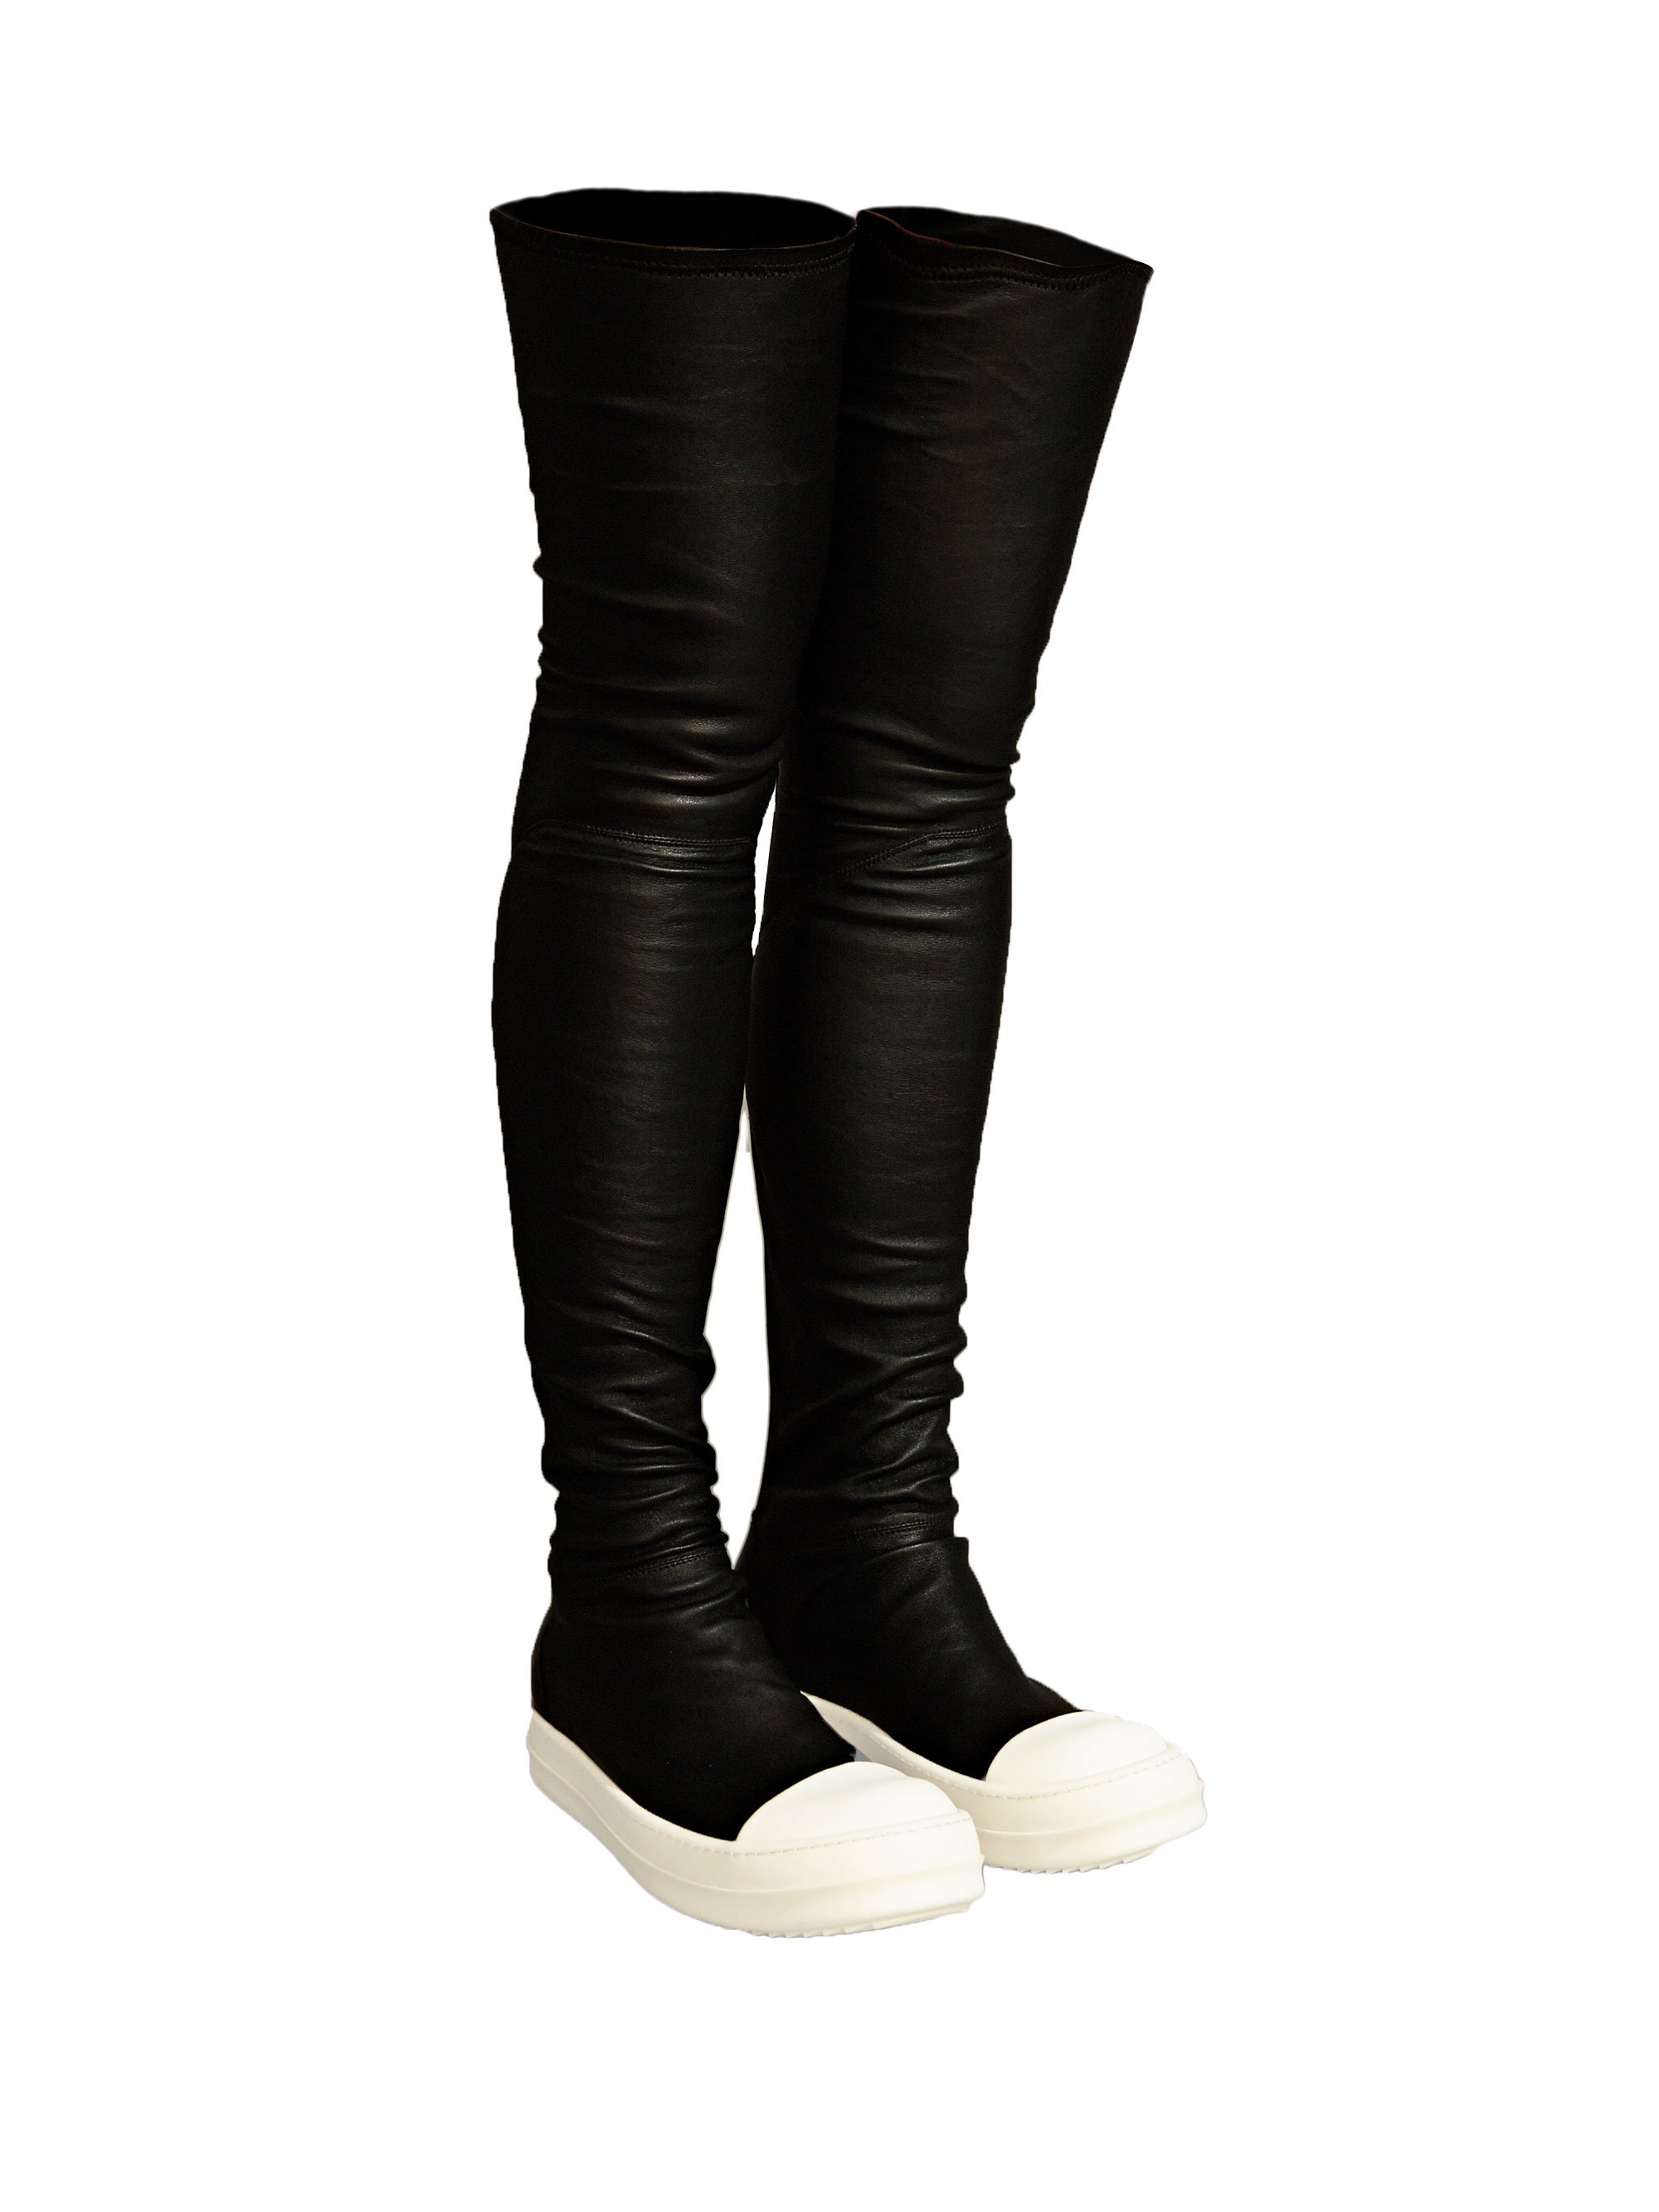 Rick Owens Womens Thigh High Sneaker Boots in Black - Lyst